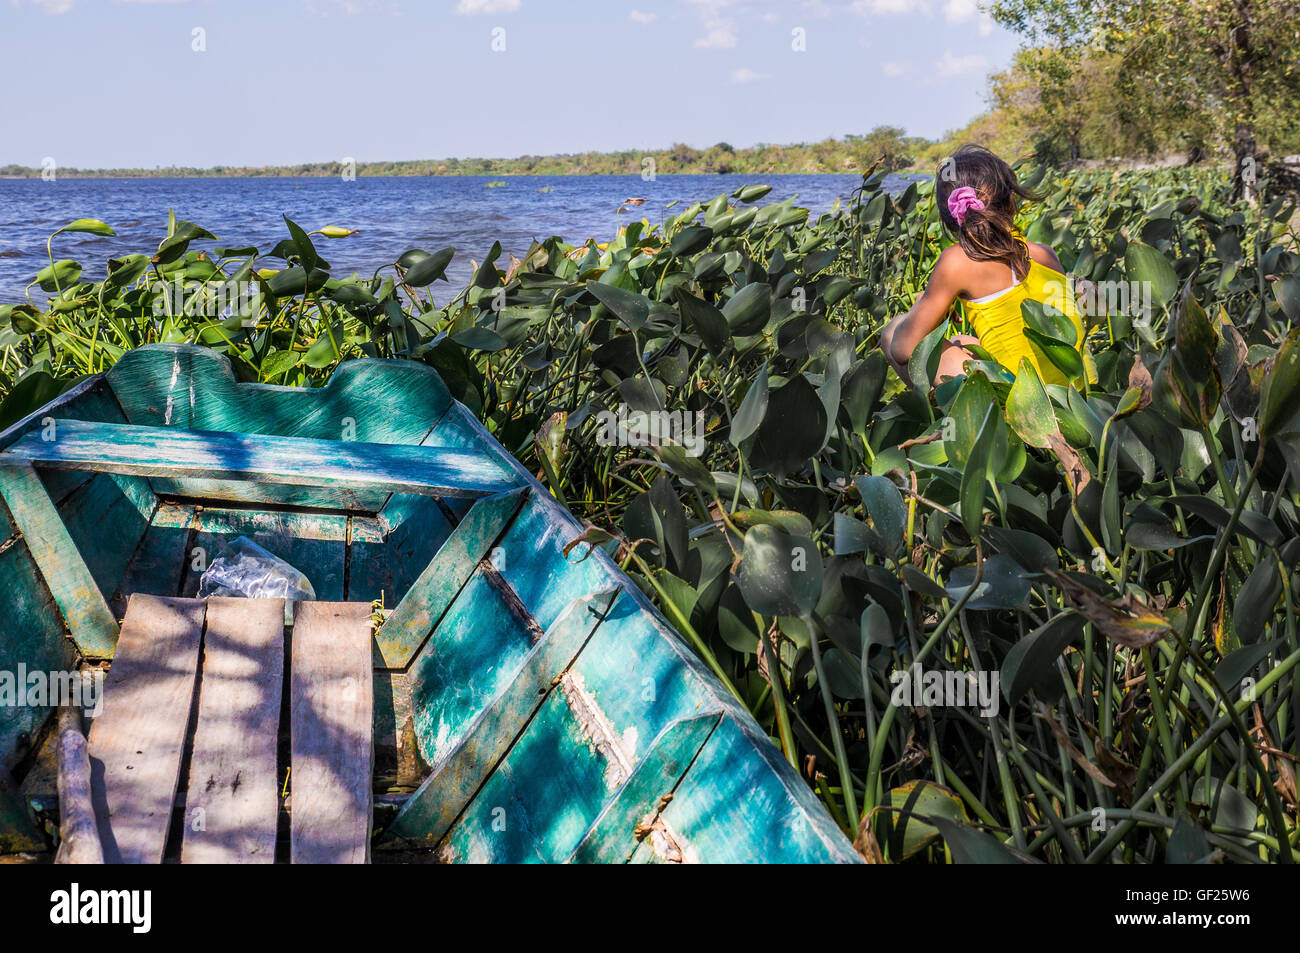 Boat with plants and girl Stock Photo